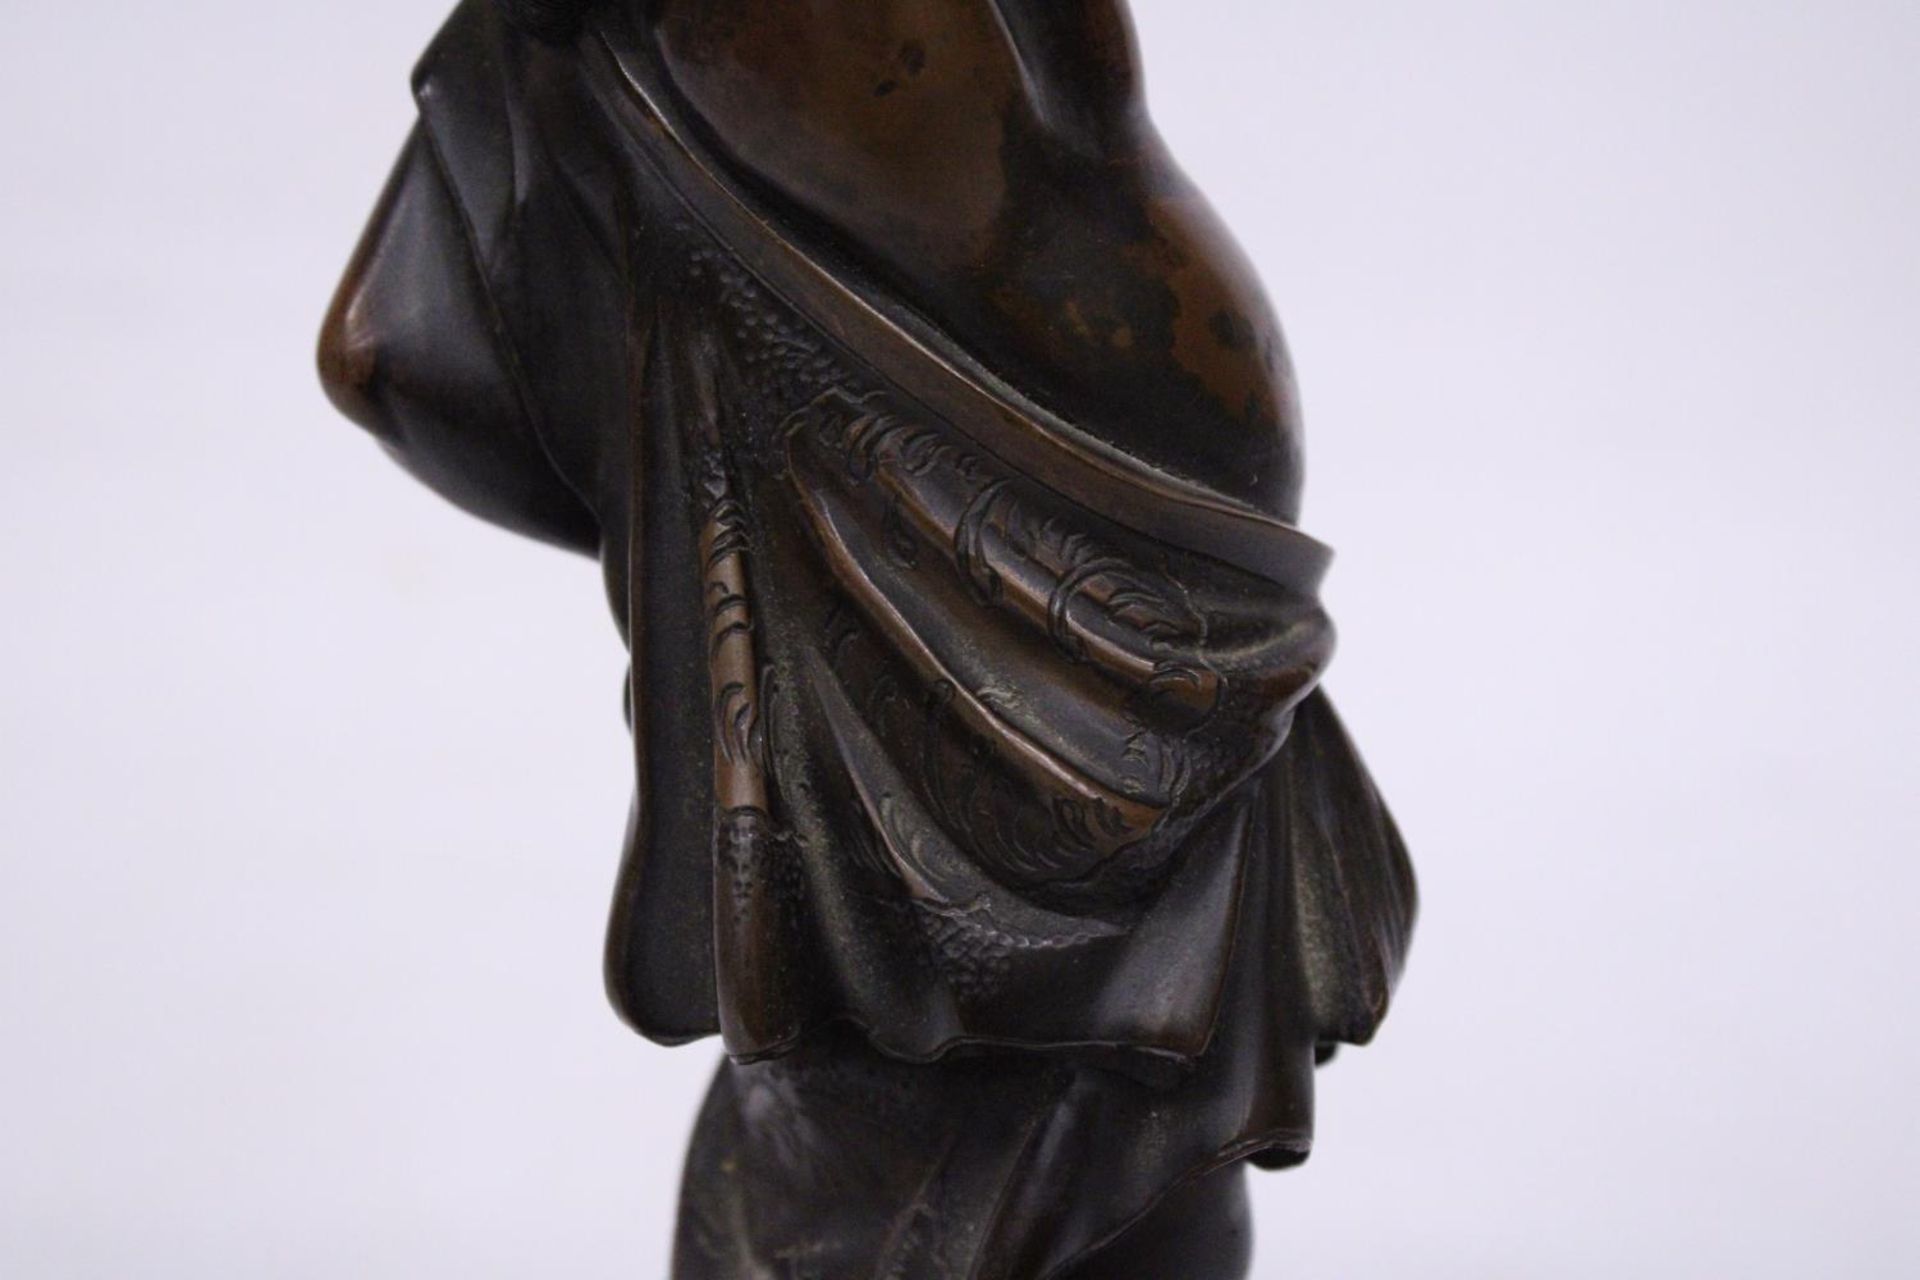 A BRONZE MEIJI PERIOD STATUE OF A FIGURE HOLDING A VASE WITH COVER - Image 5 of 7